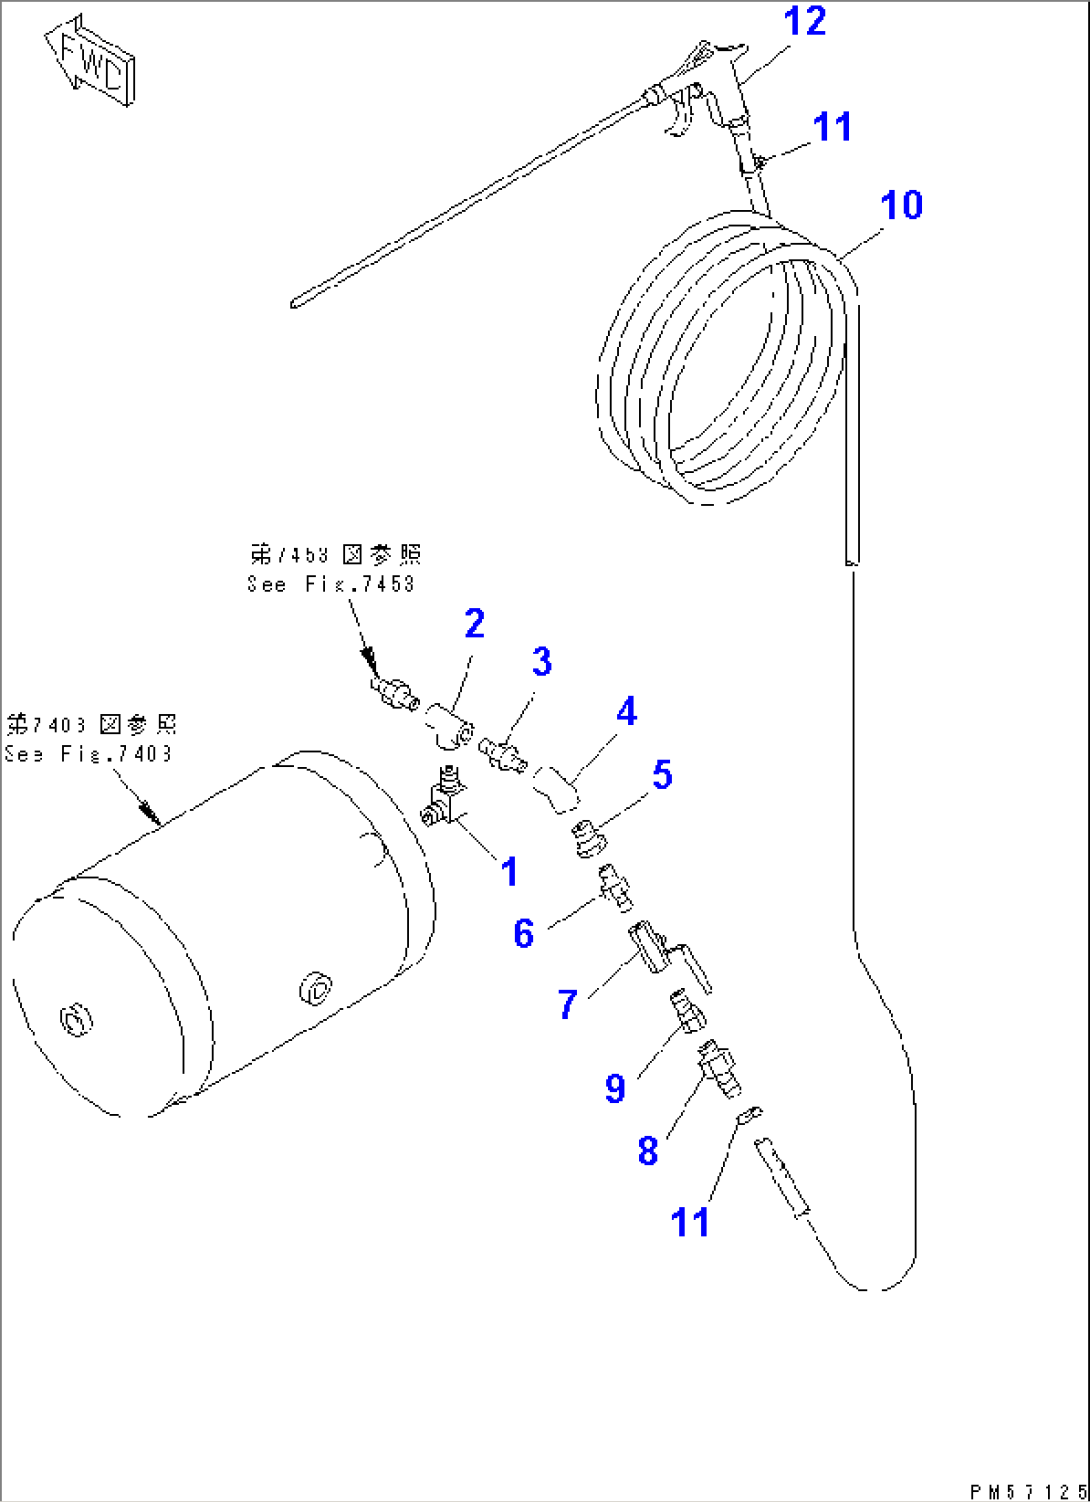 DUST COLLECTOR PIPING (2/3) (AIR TANK TO AIR DUSTER)